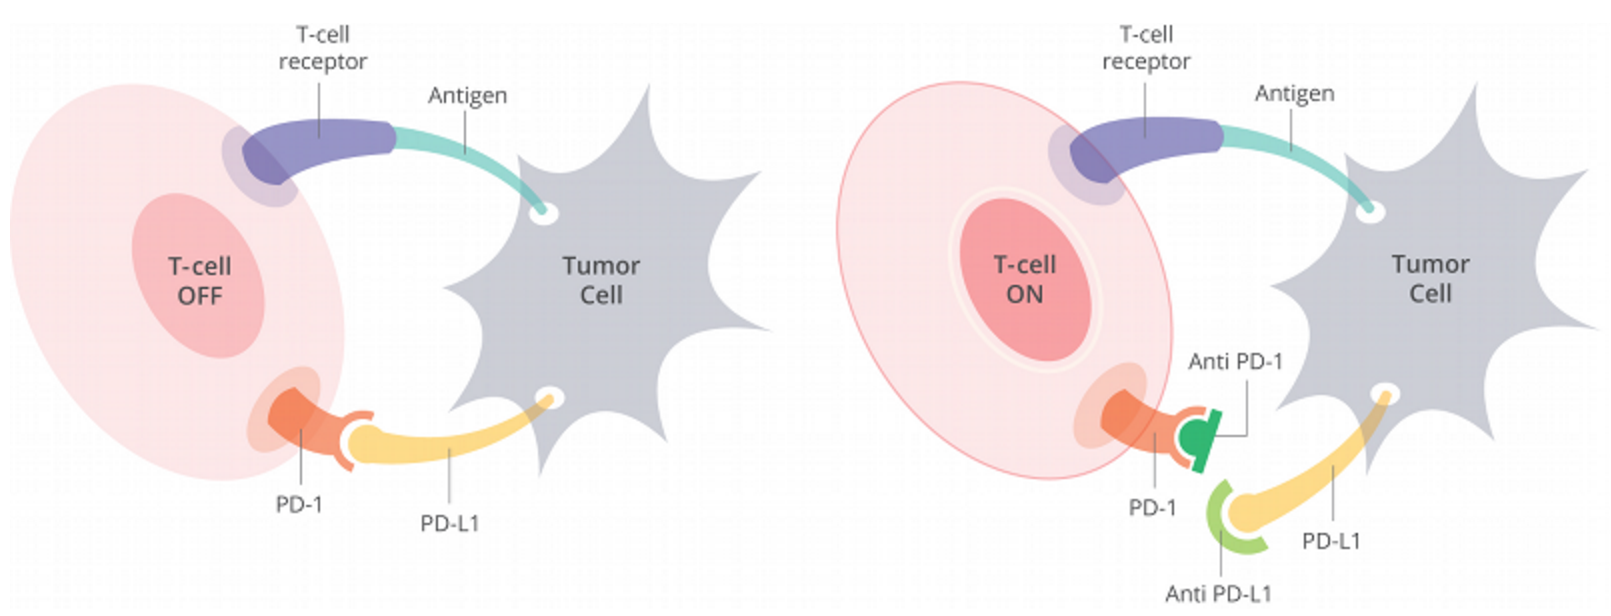 Figure 1. Cells have a protein on their surface called PD-1 (in orange above). When PD-1 binds to PD-L1 (yellow) on another cell, the T cell becomes deactivated. Most cancer cells have PD-L1 on their surface and escape being killed by turning off the T cell in this way. Anti-PD-1 antibodies (dark green) or anti-PD-L1 antibodies (light green) can prevent the tumor cell from binding PD-1 and thus allow T cells to remain active. http://www.curetoday.com/articles/fda-approves-frontline-opdivo-for-braf-mutant-melanoma